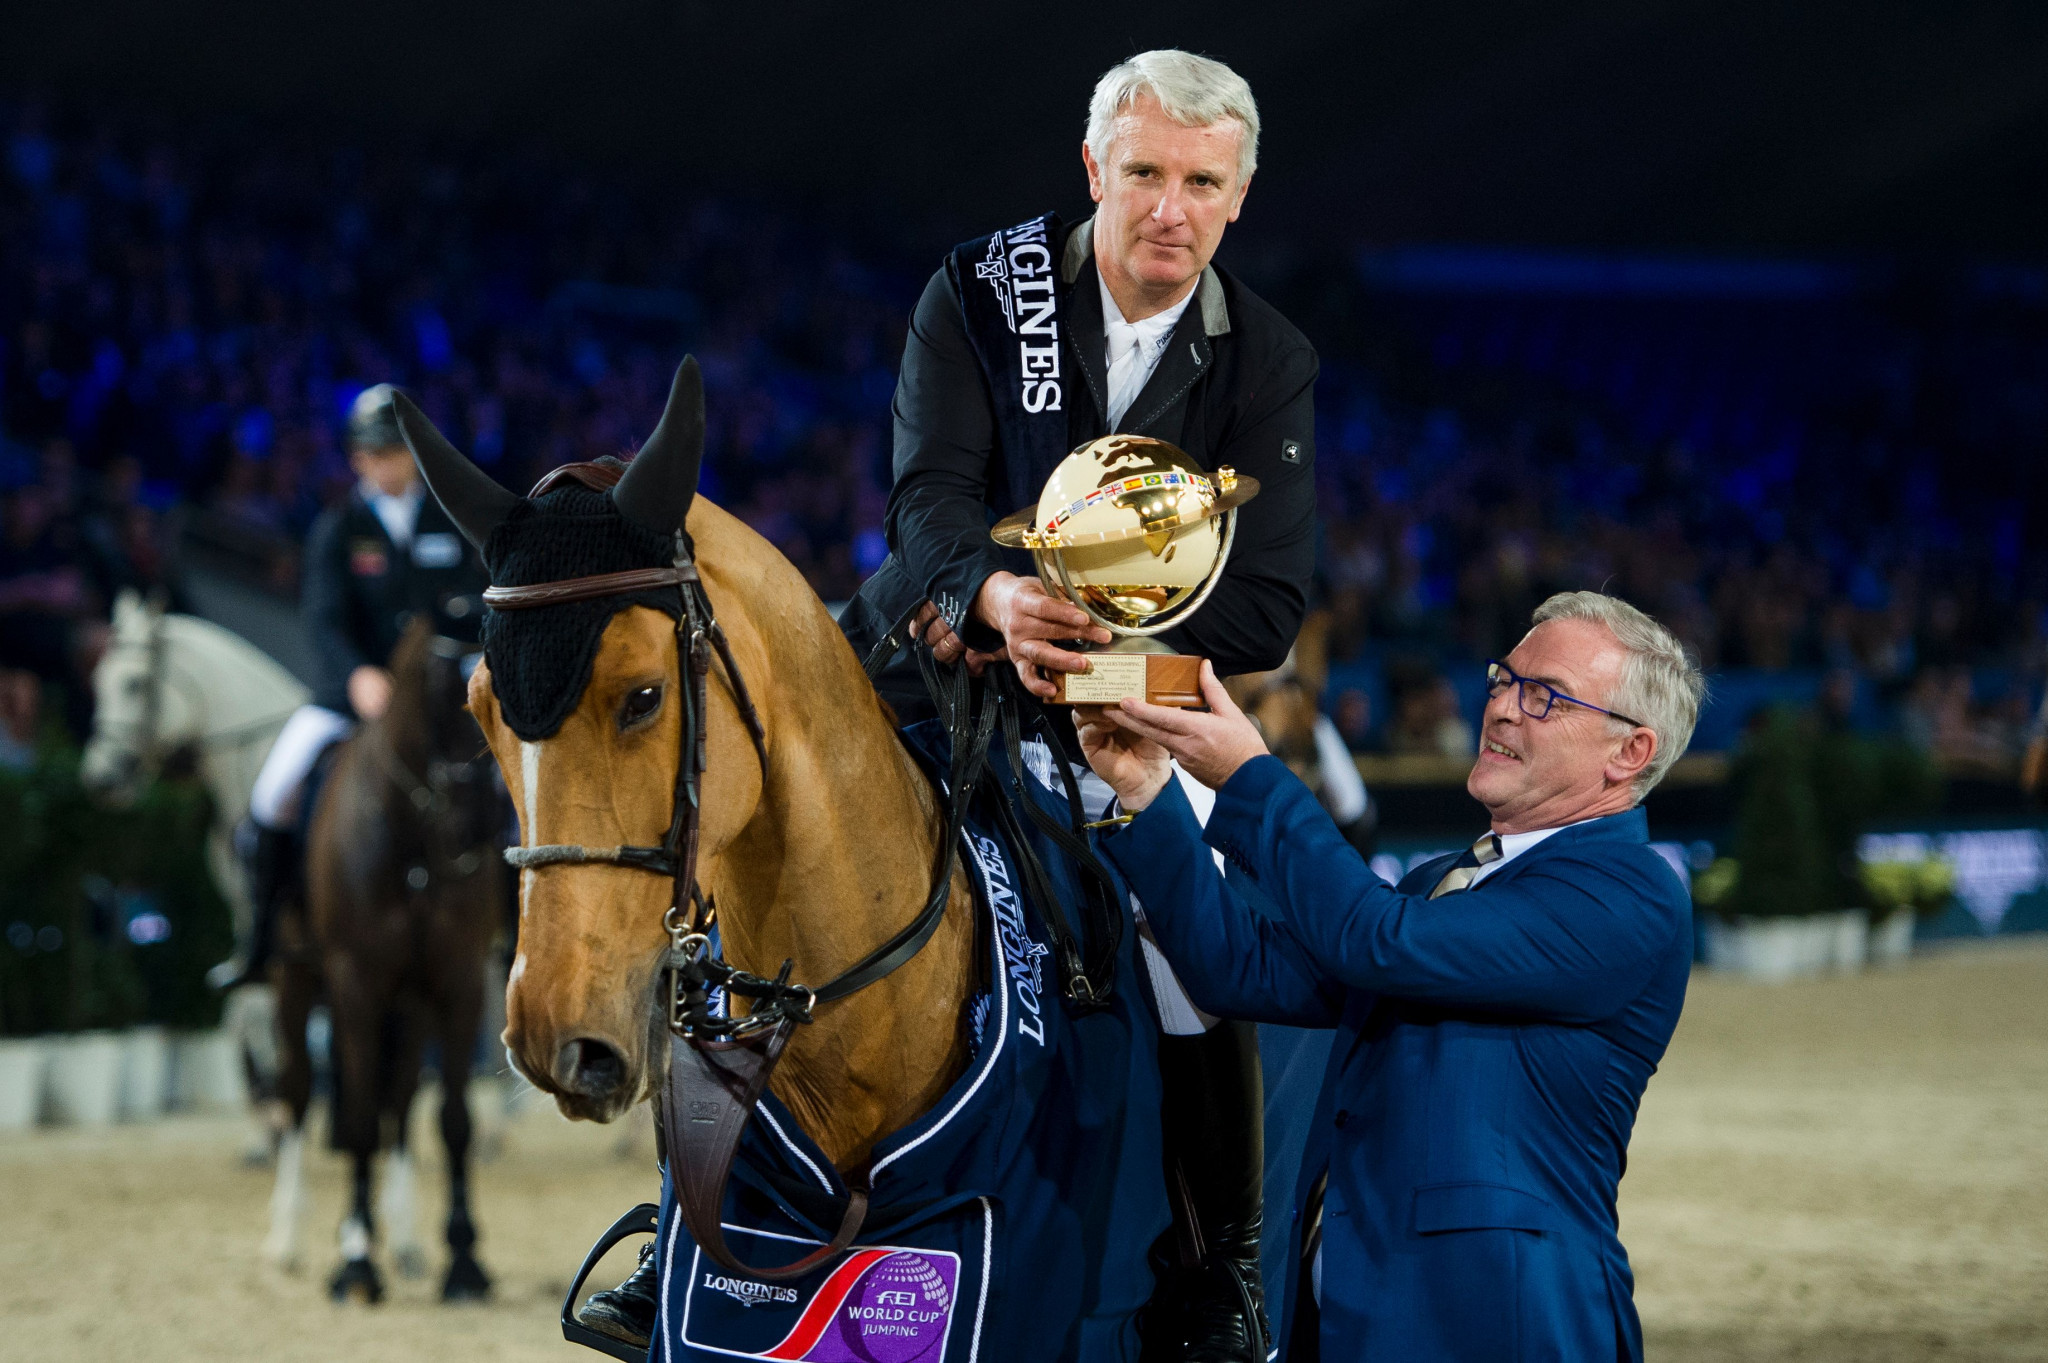 Frenchman Roger-Yves Bost, a former International Federation of Equestrian Sports World Cup jumping champion, had to settle for second at the Longines Global Champions Tour in Hamburg ©Getty Images